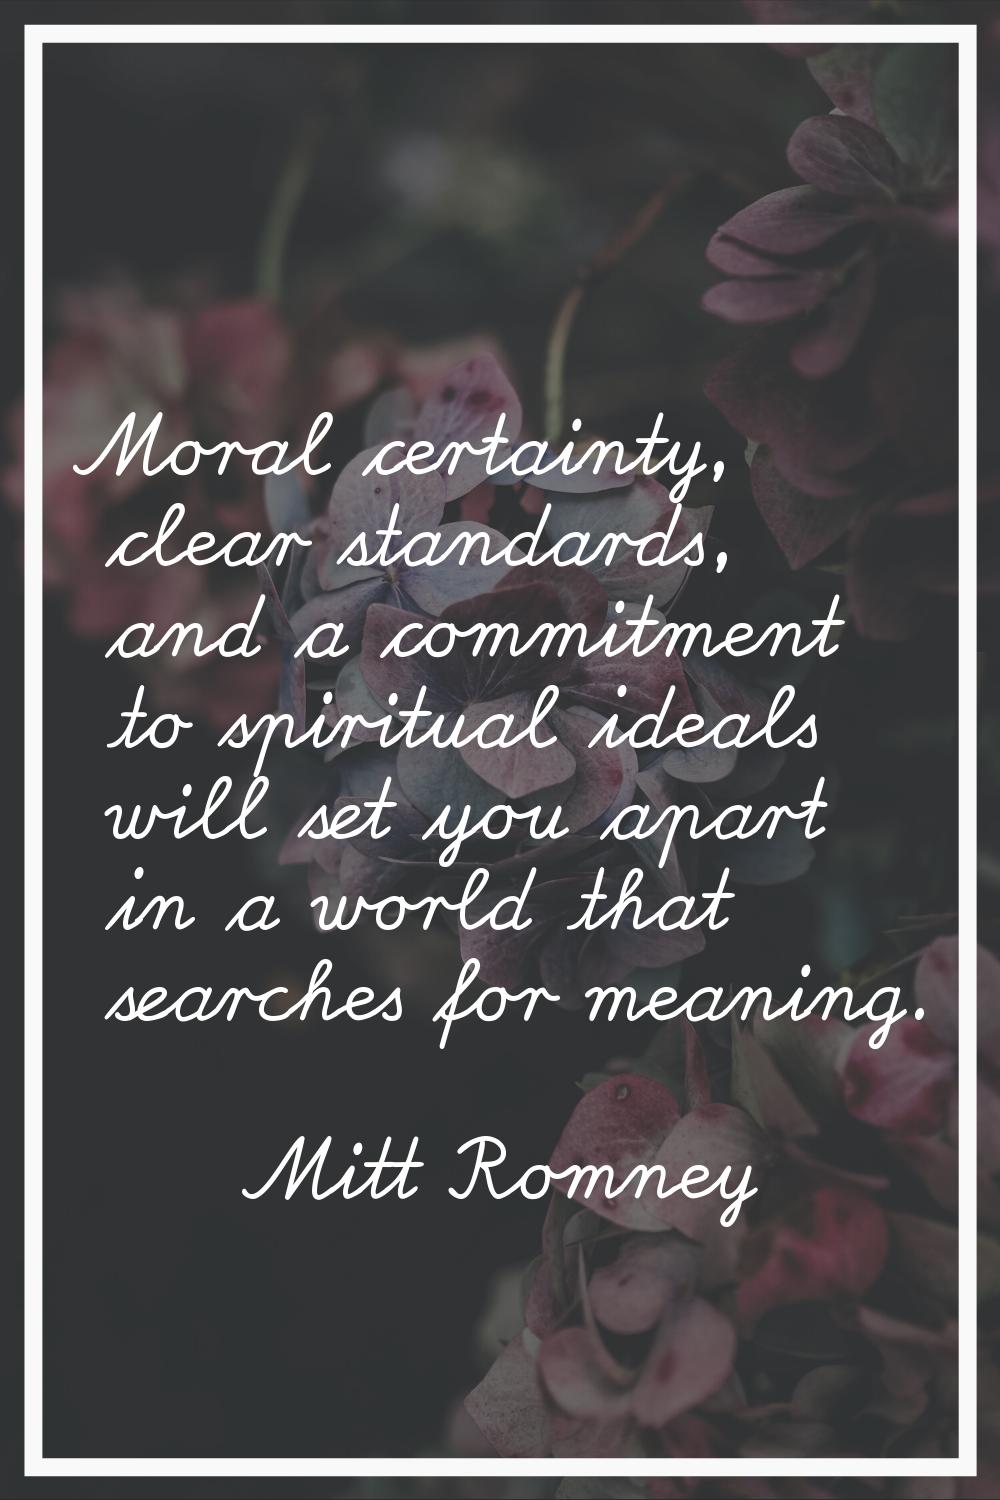 Moral certainty, clear standards, and a commitment to spiritual ideals will set you apart in a worl